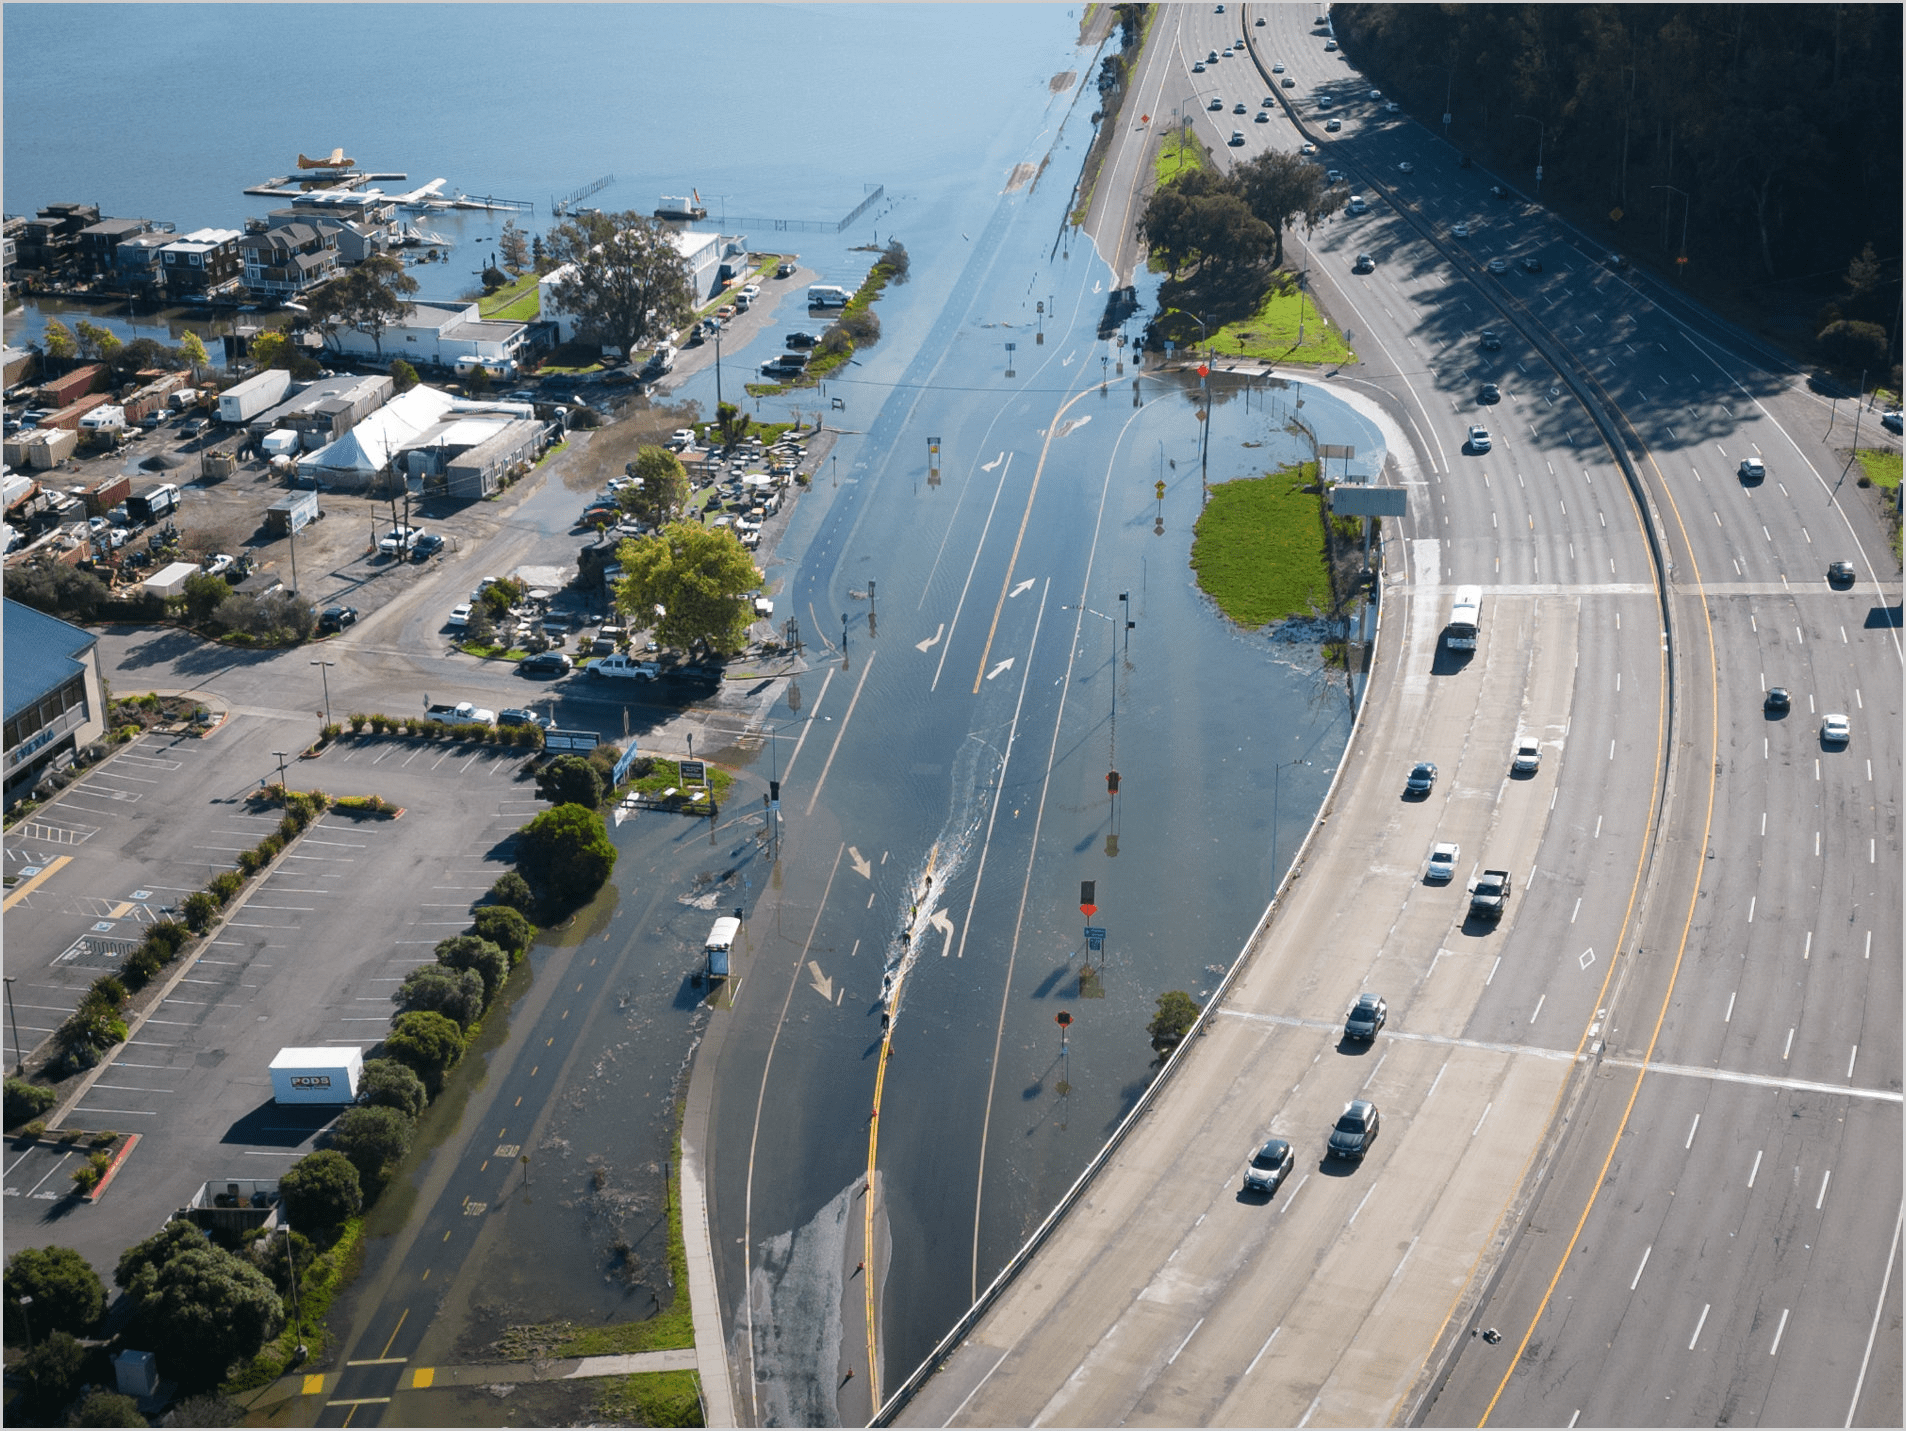 flooded roadway by large coastal highway onramp (right) and various small buildings and parking on the coast side (left)